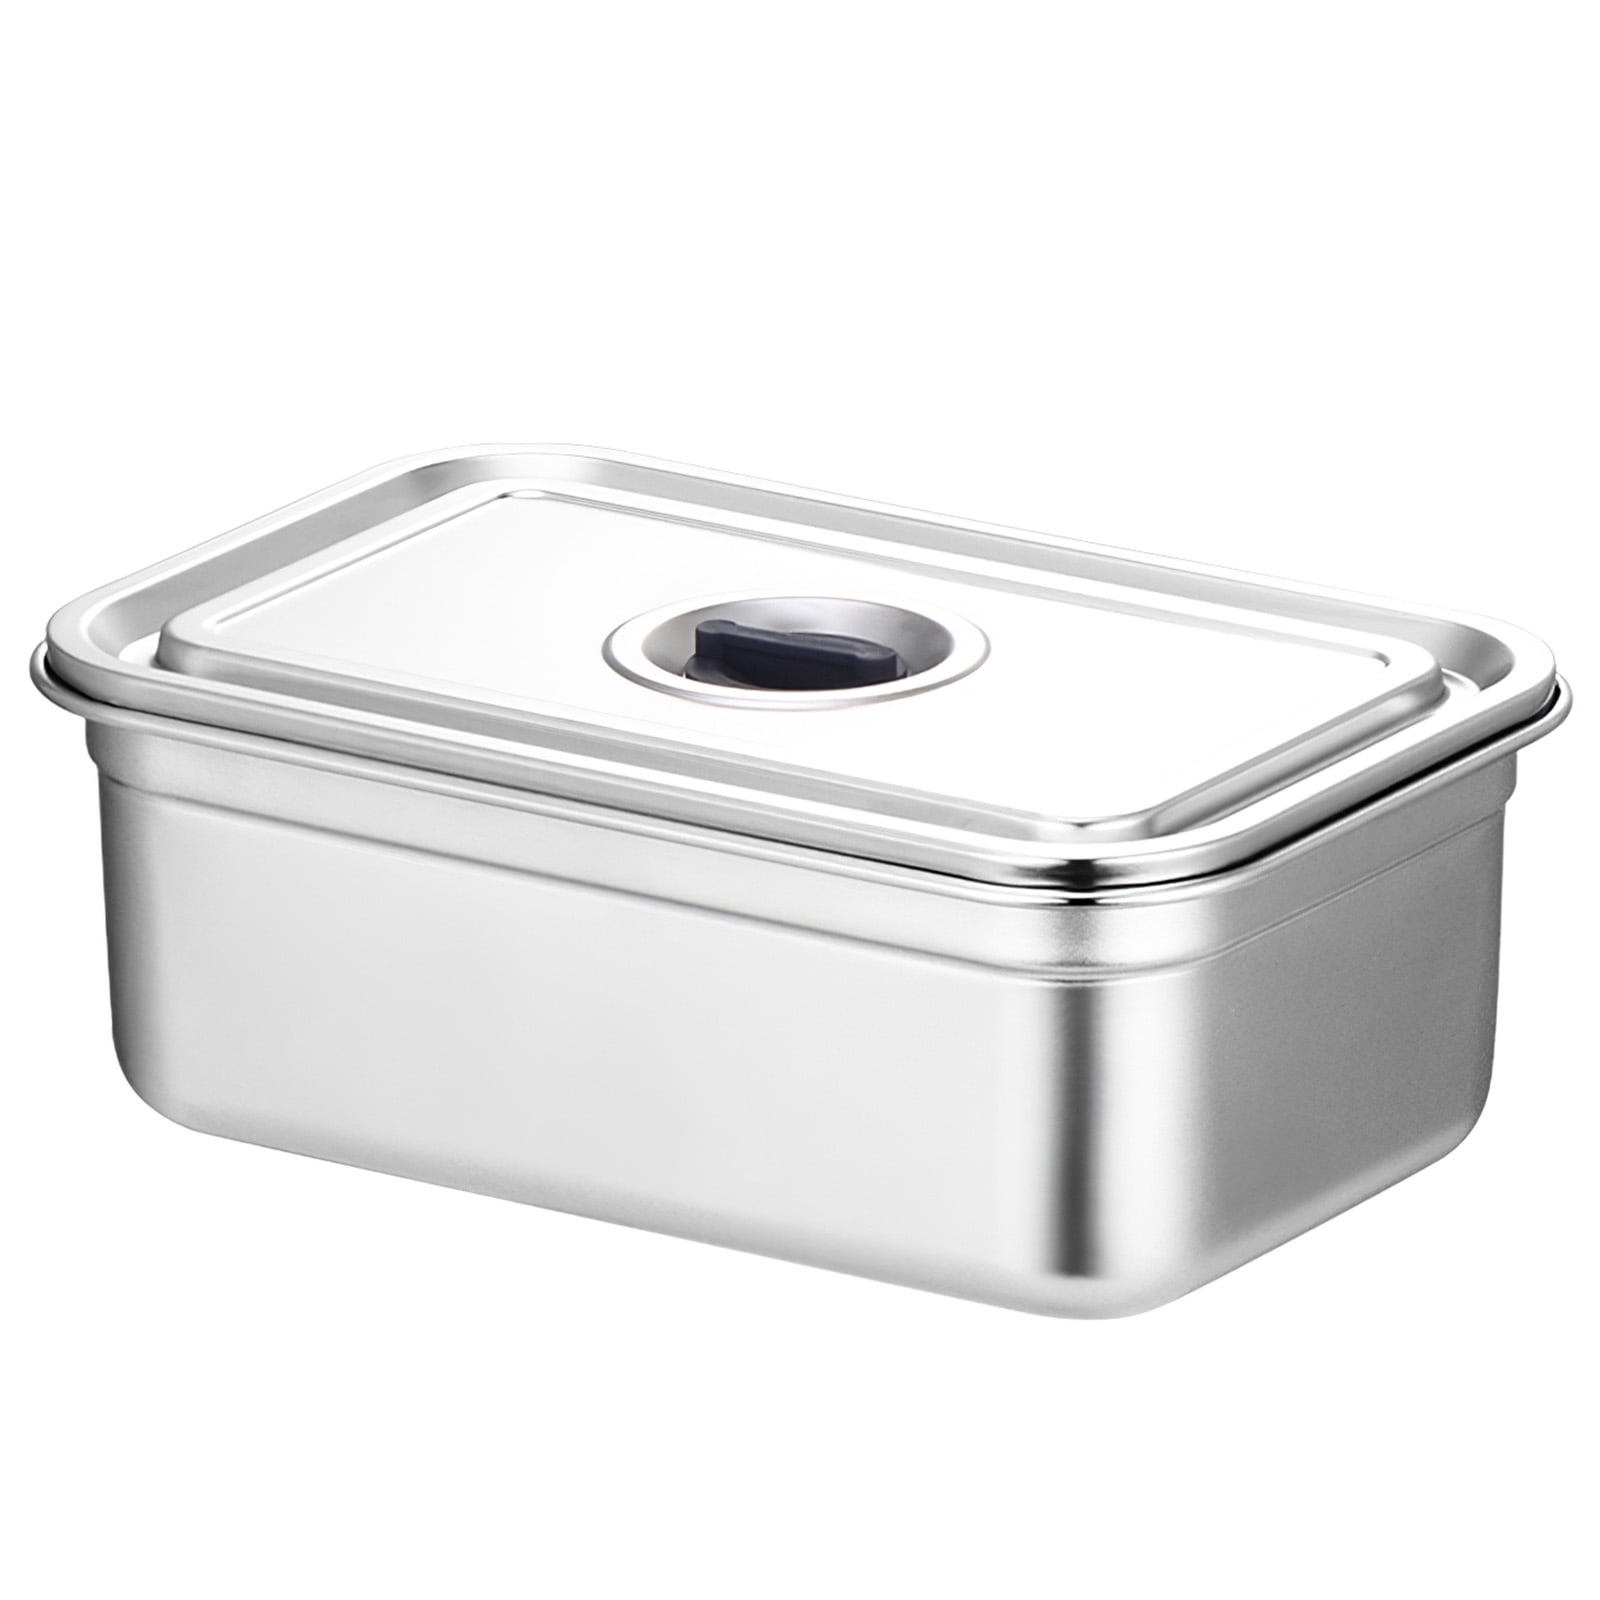 4Pcs Stainless Steel Food Containers Food Sample Boxes Food Storage  Containers for School Canteen 